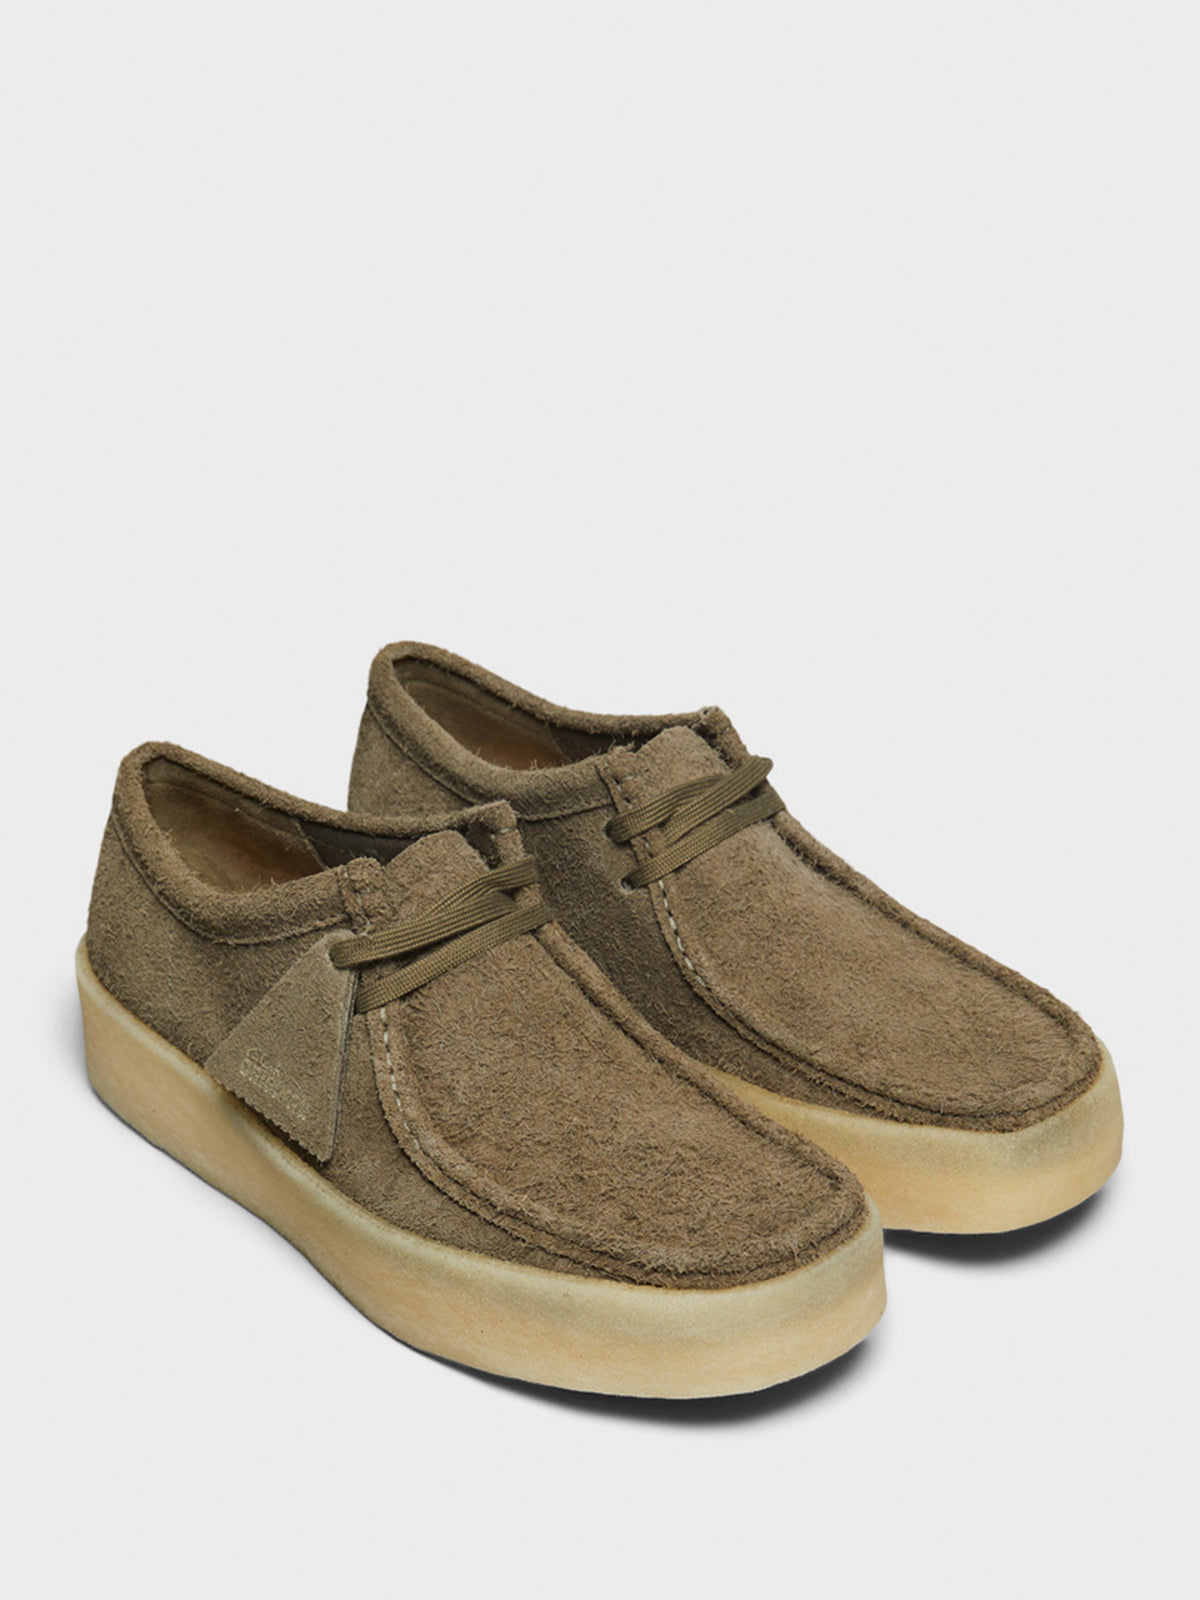 Wallabee Cup Shoes in Pale Khaki Suede